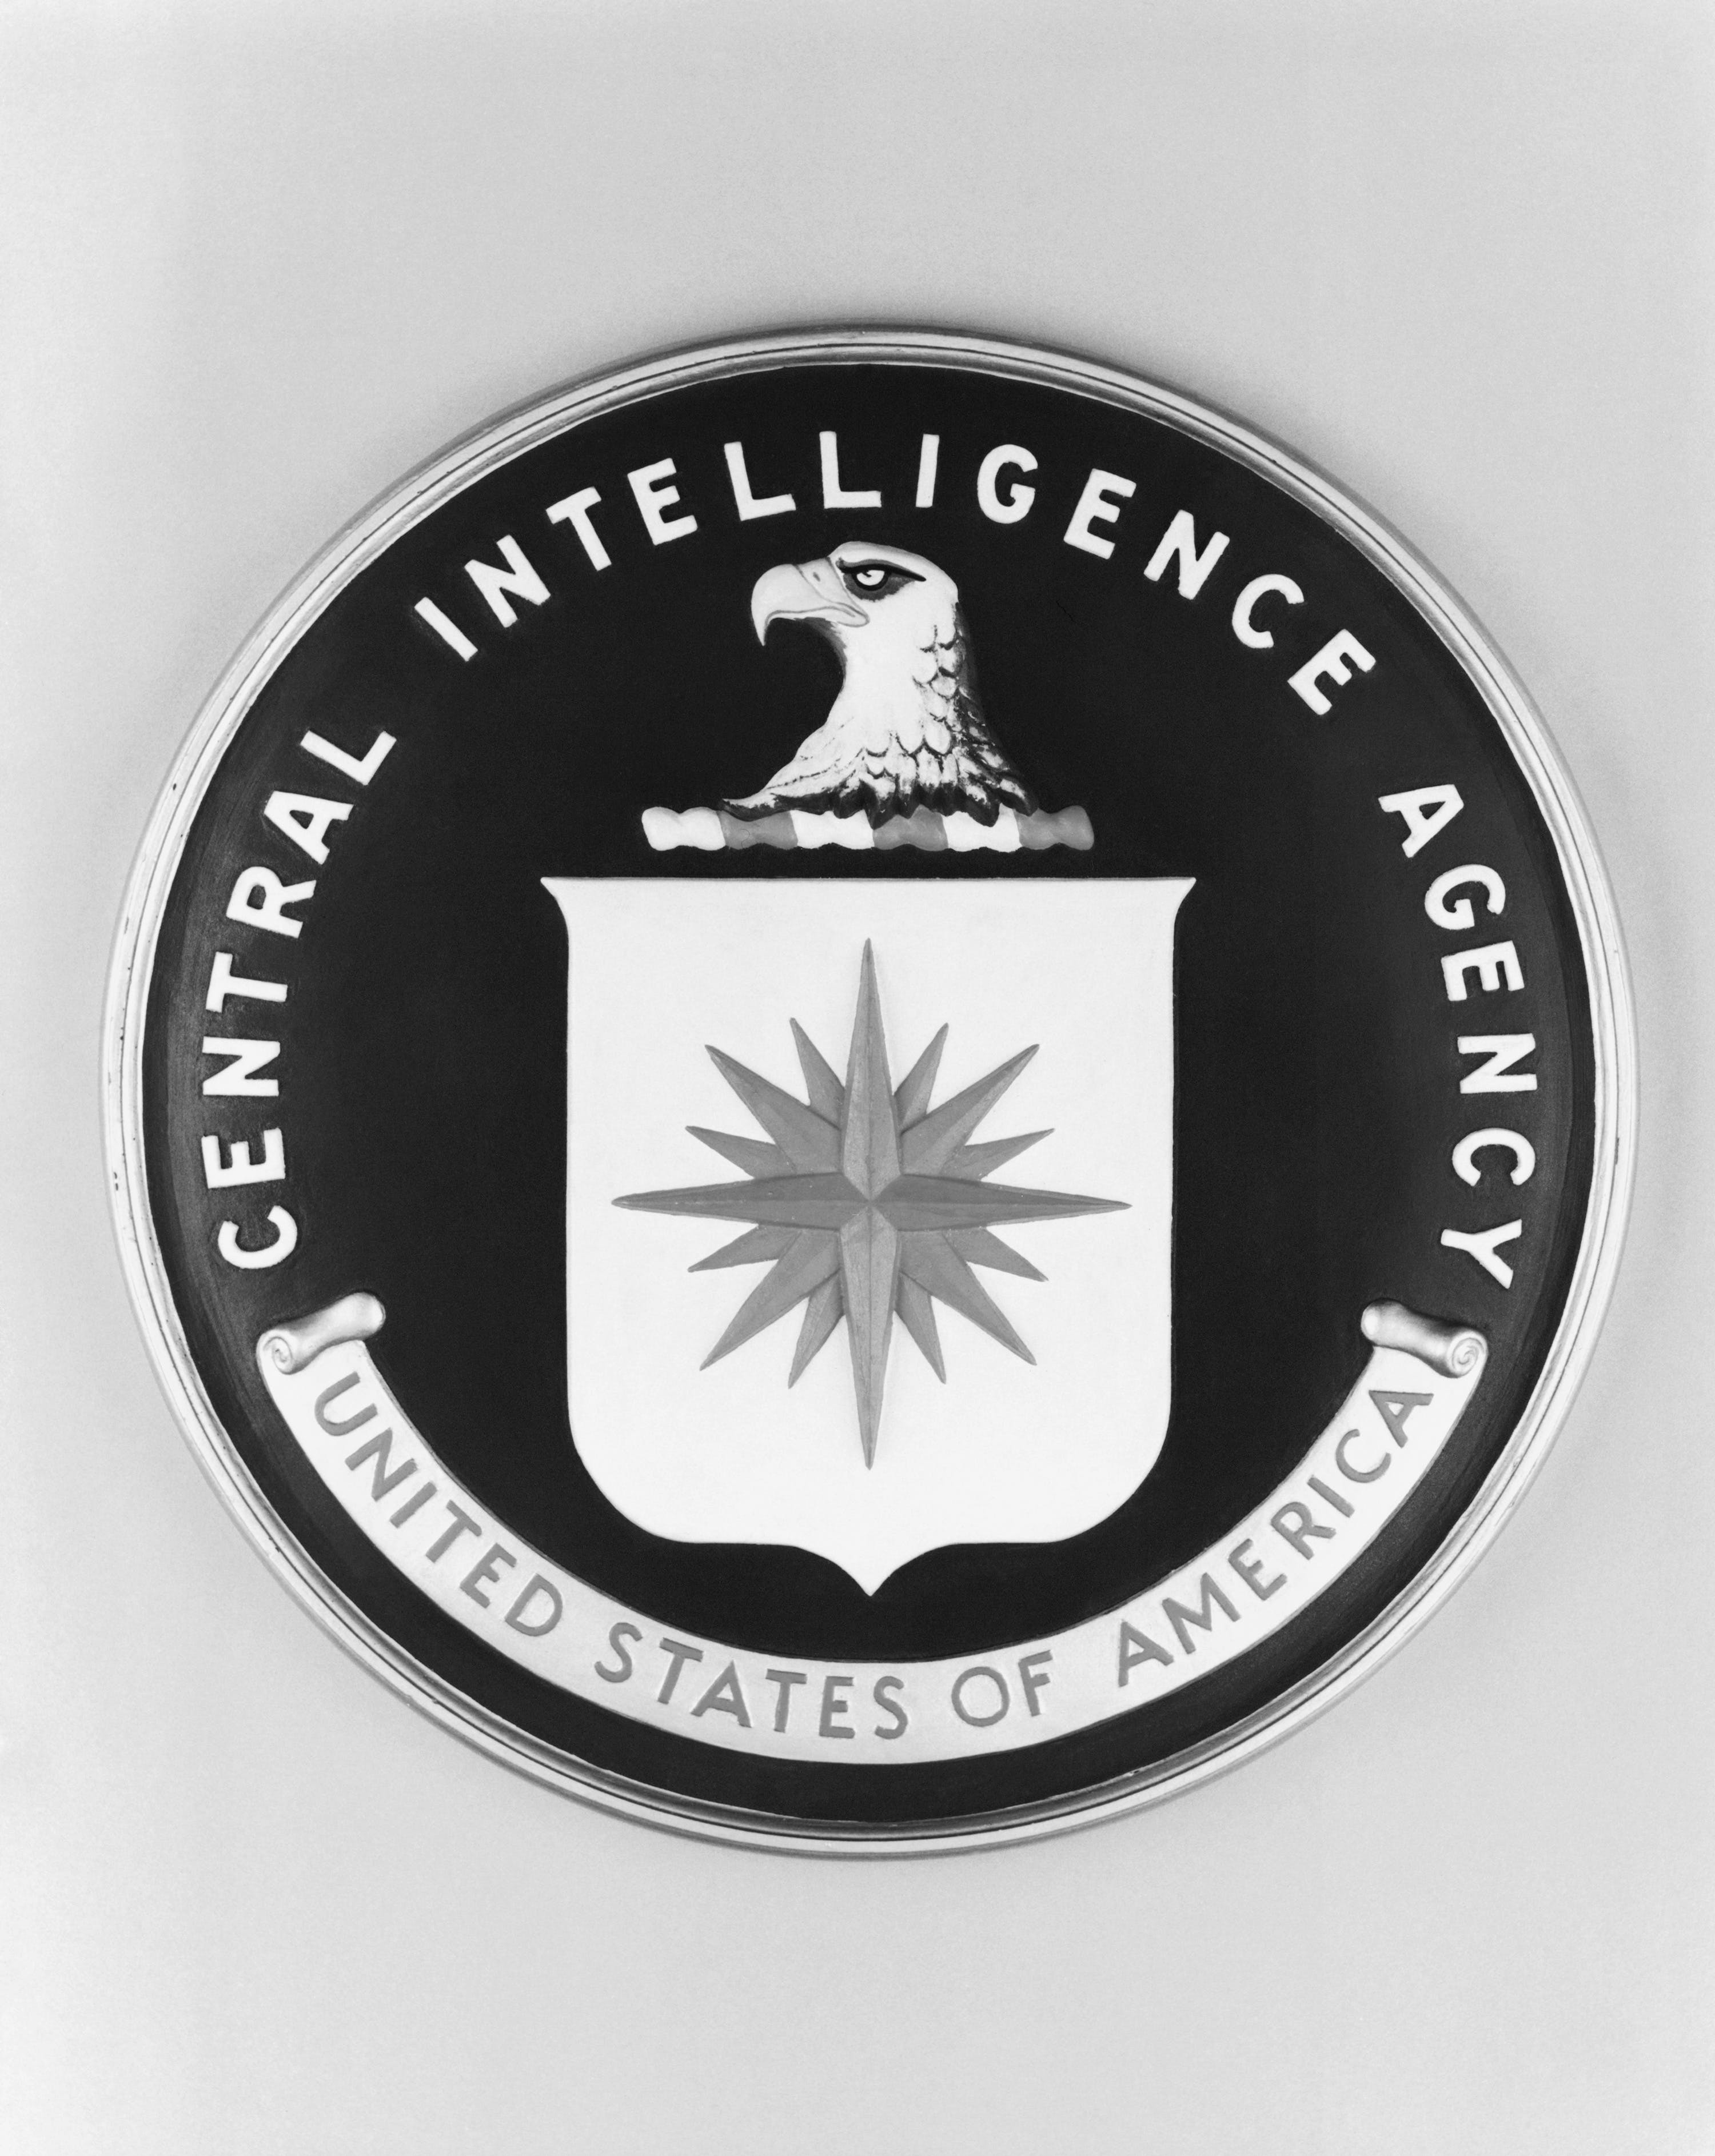 1974-ORIGINAL CAPTION READS:  Close-up of the official seal of the Central Intelligence Agency (CIA).